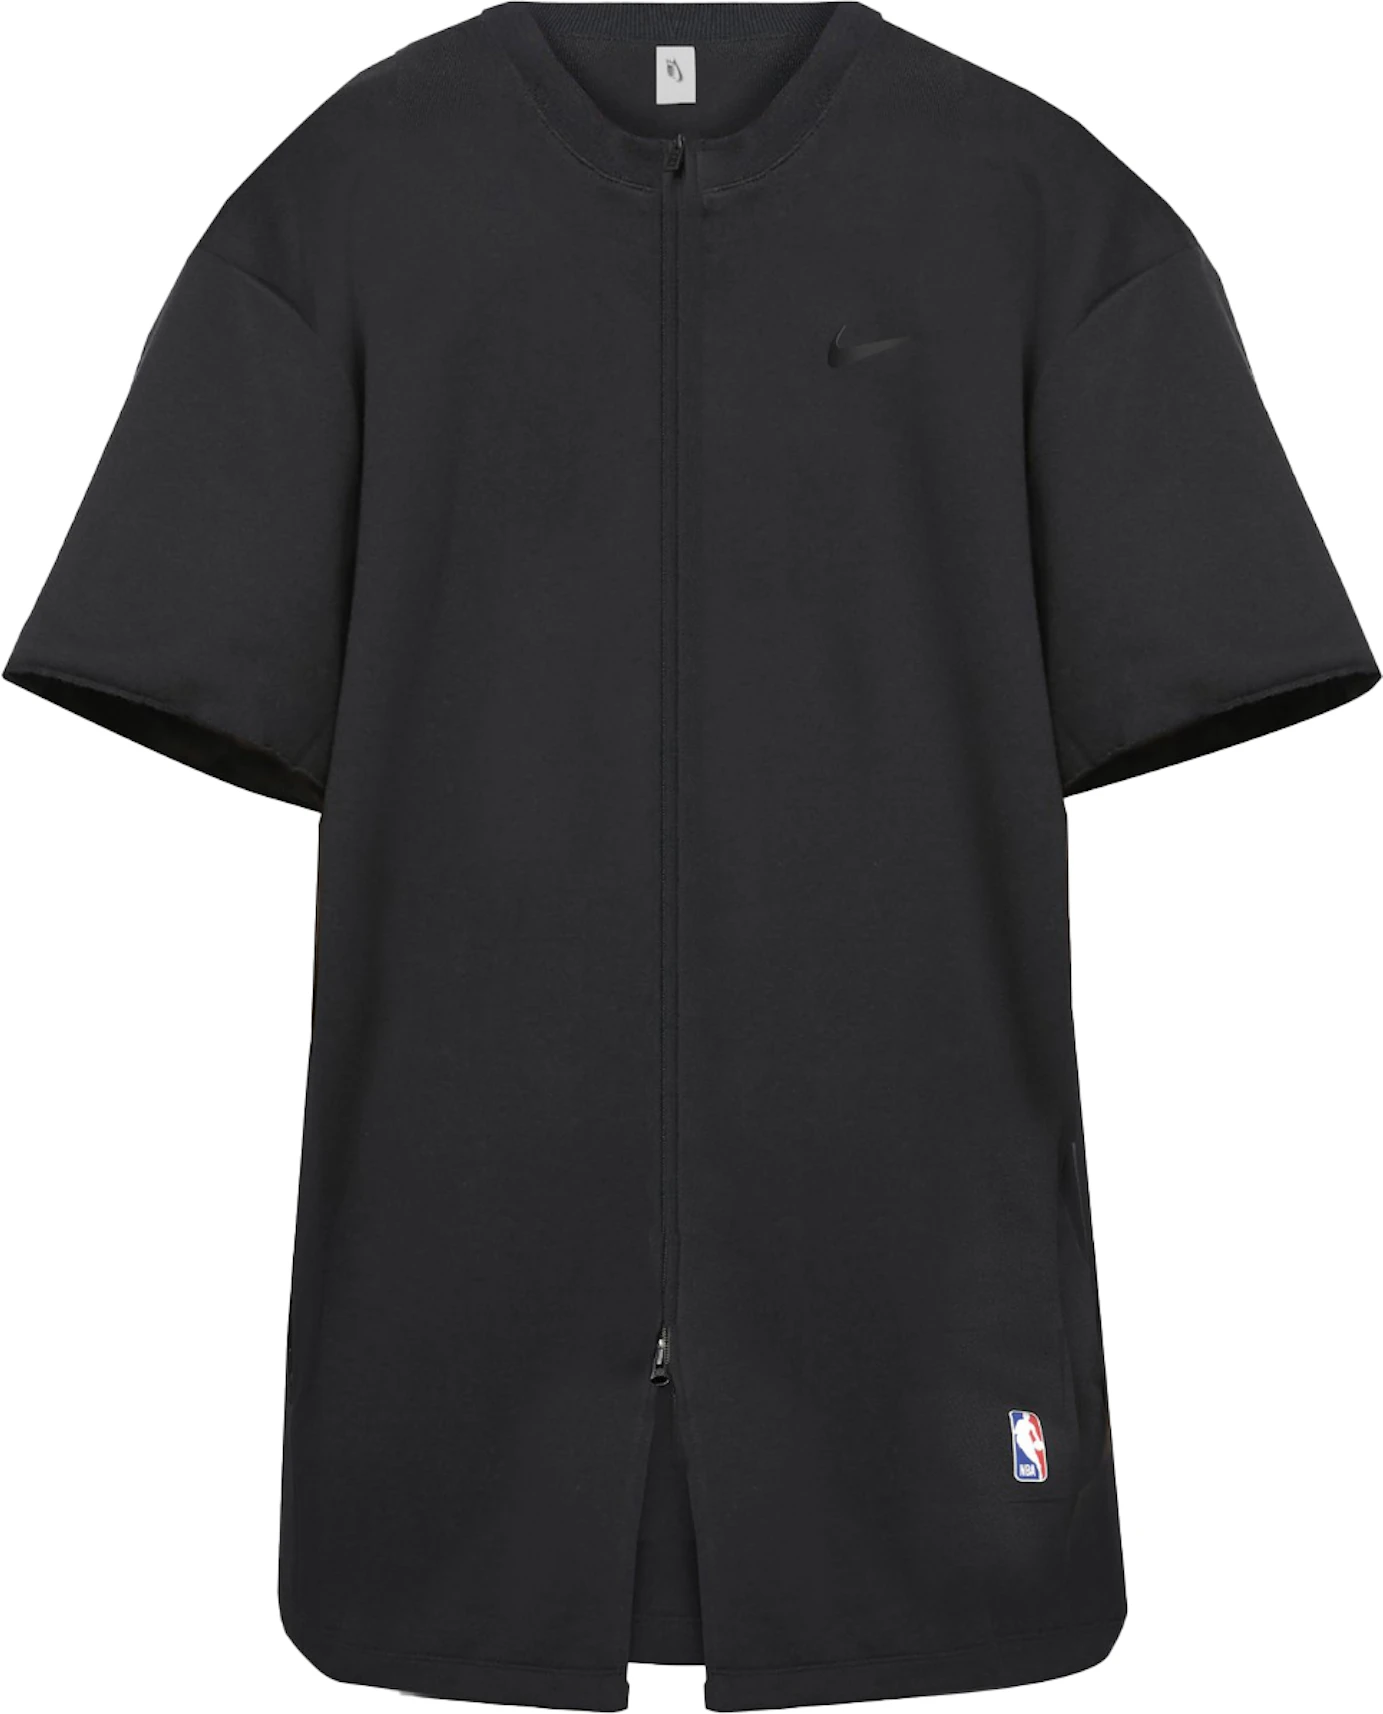 FEAR OF GOD Nike Warm Up Jacket Black XS新品未使用タグ付き